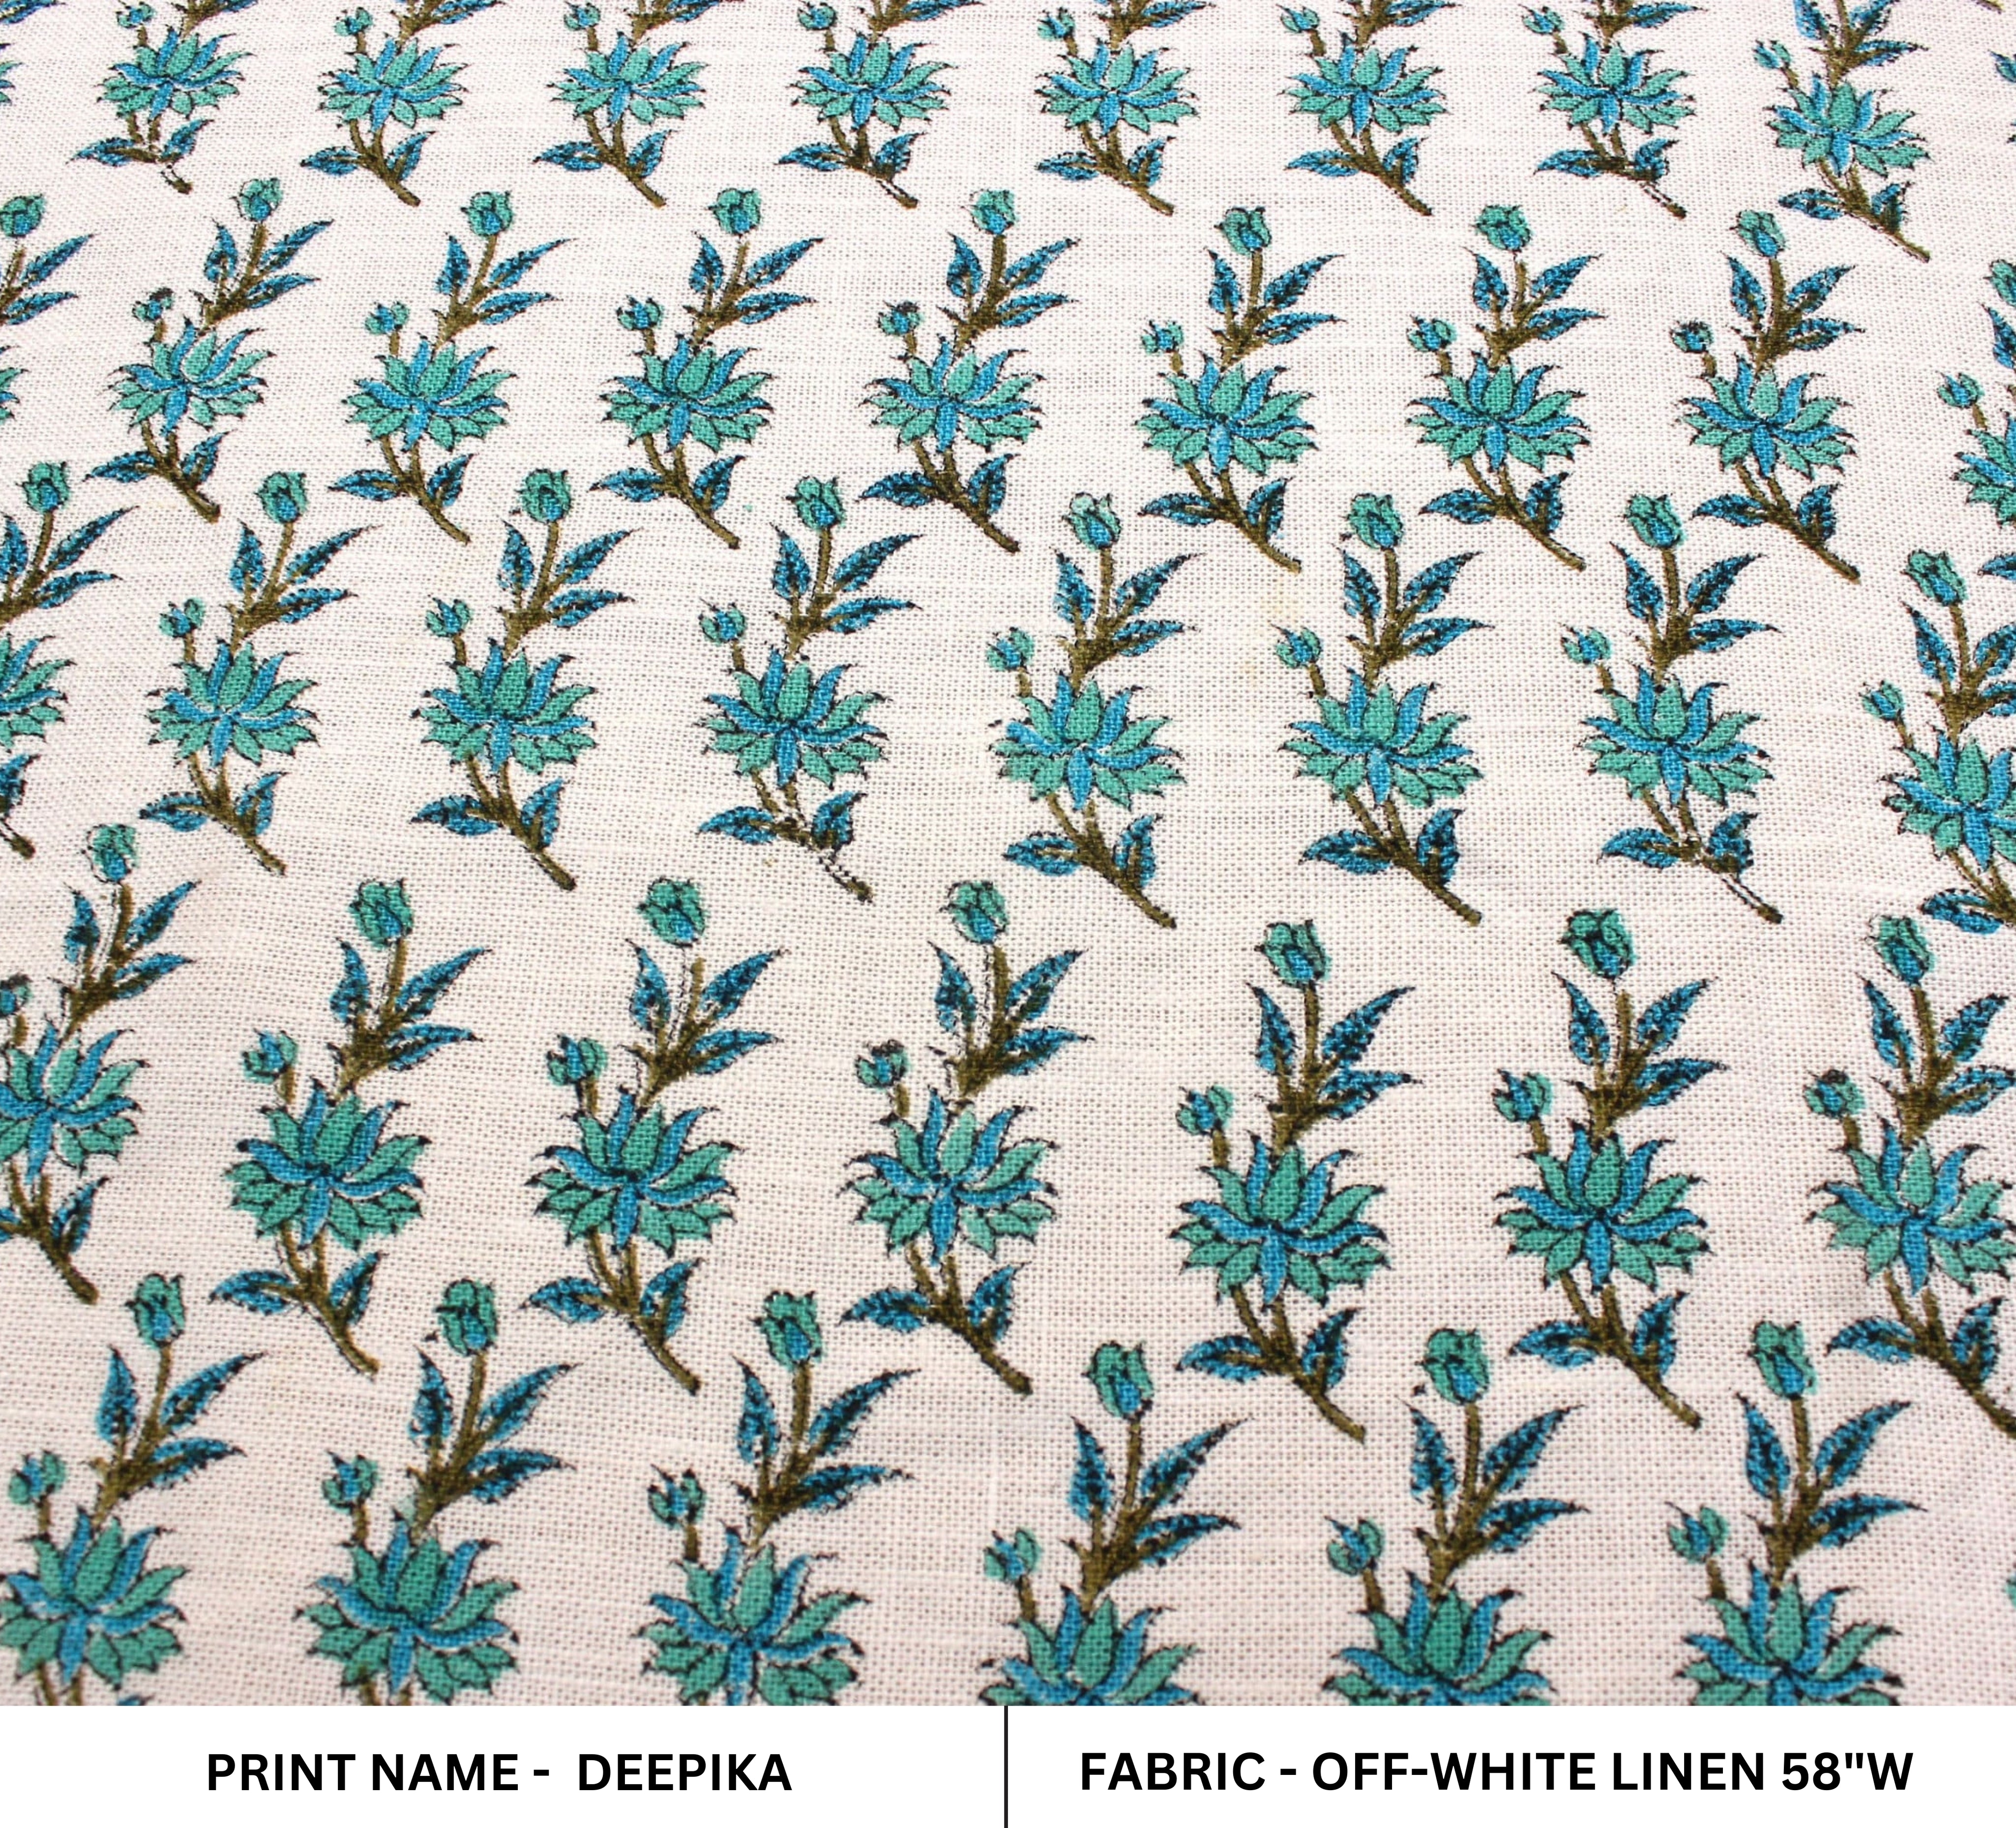 Block Print off white Linen 58" Wide, Genuine Fabric, Curtain Cover, Floral, Indian Cushion Cover - Deepika